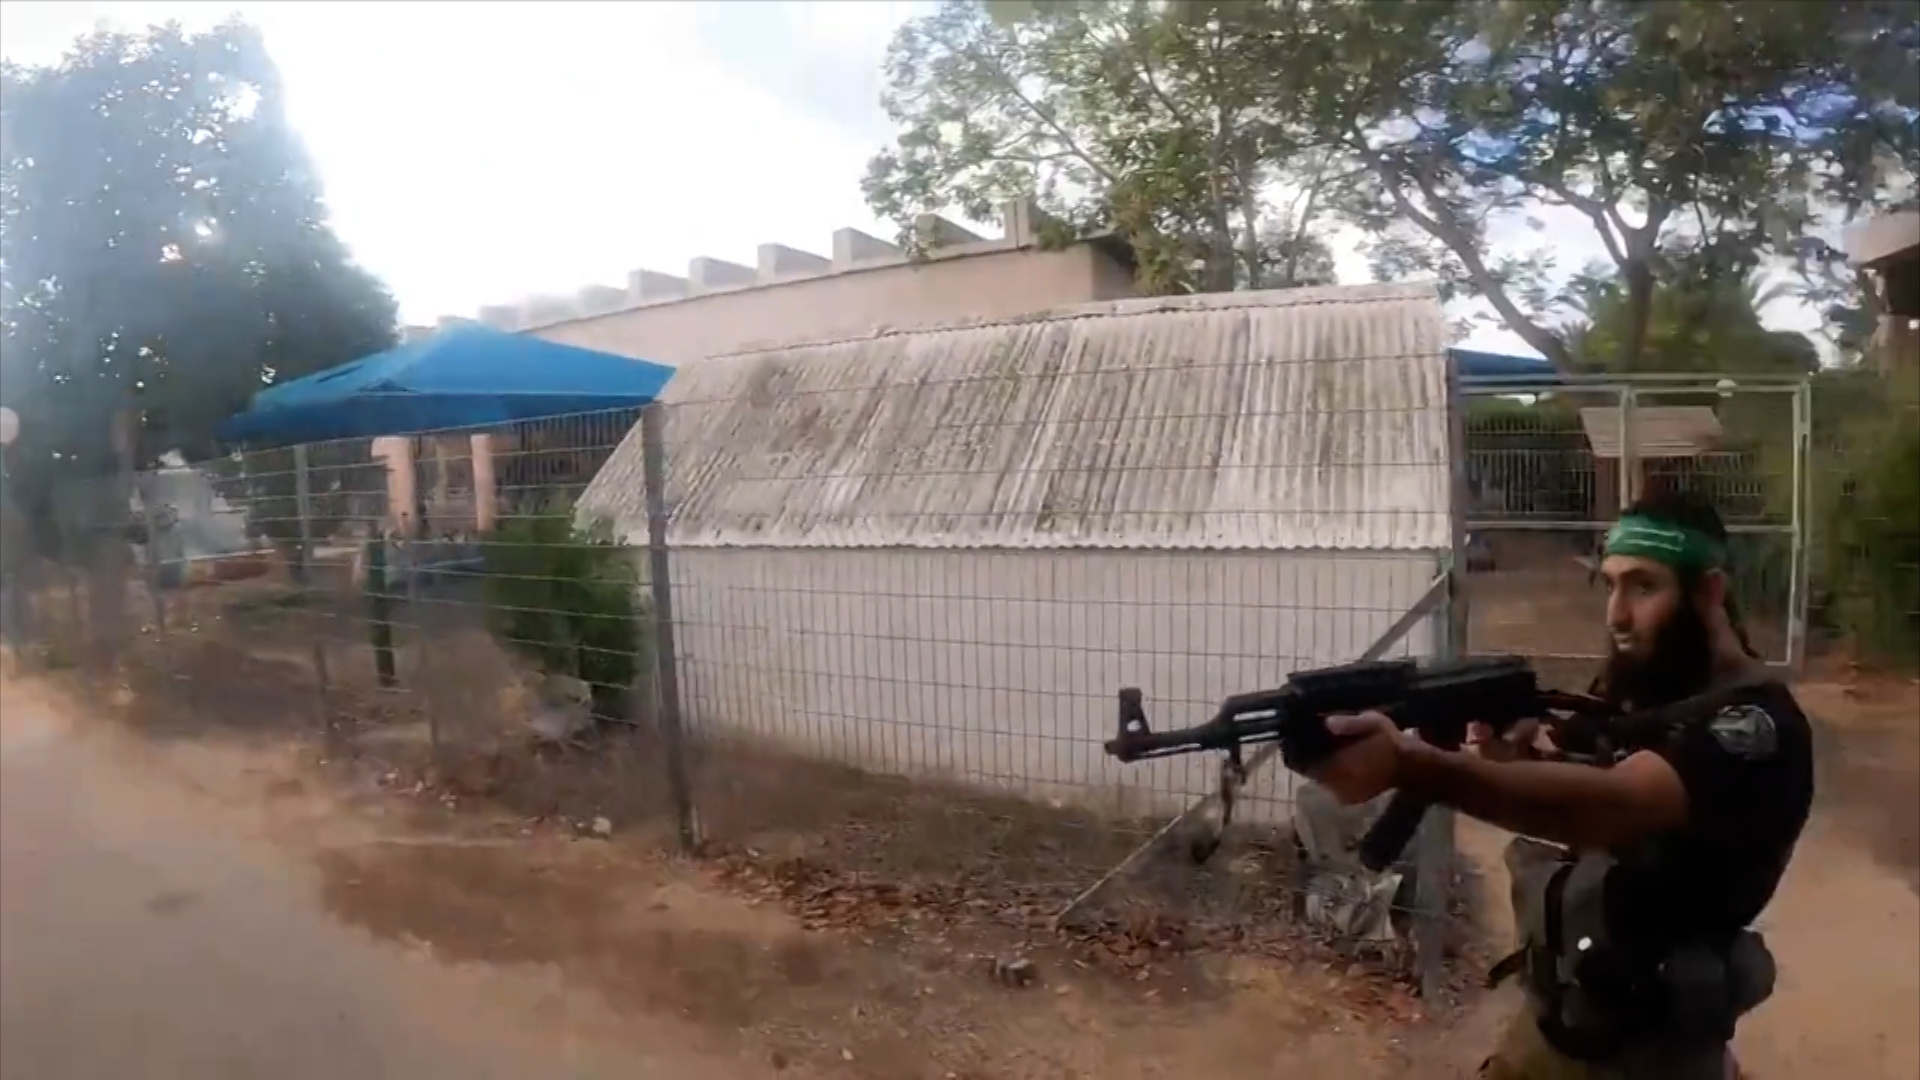 First-person GoPro footage shows Hamas militants attacking Isreali village before being shot by IDF